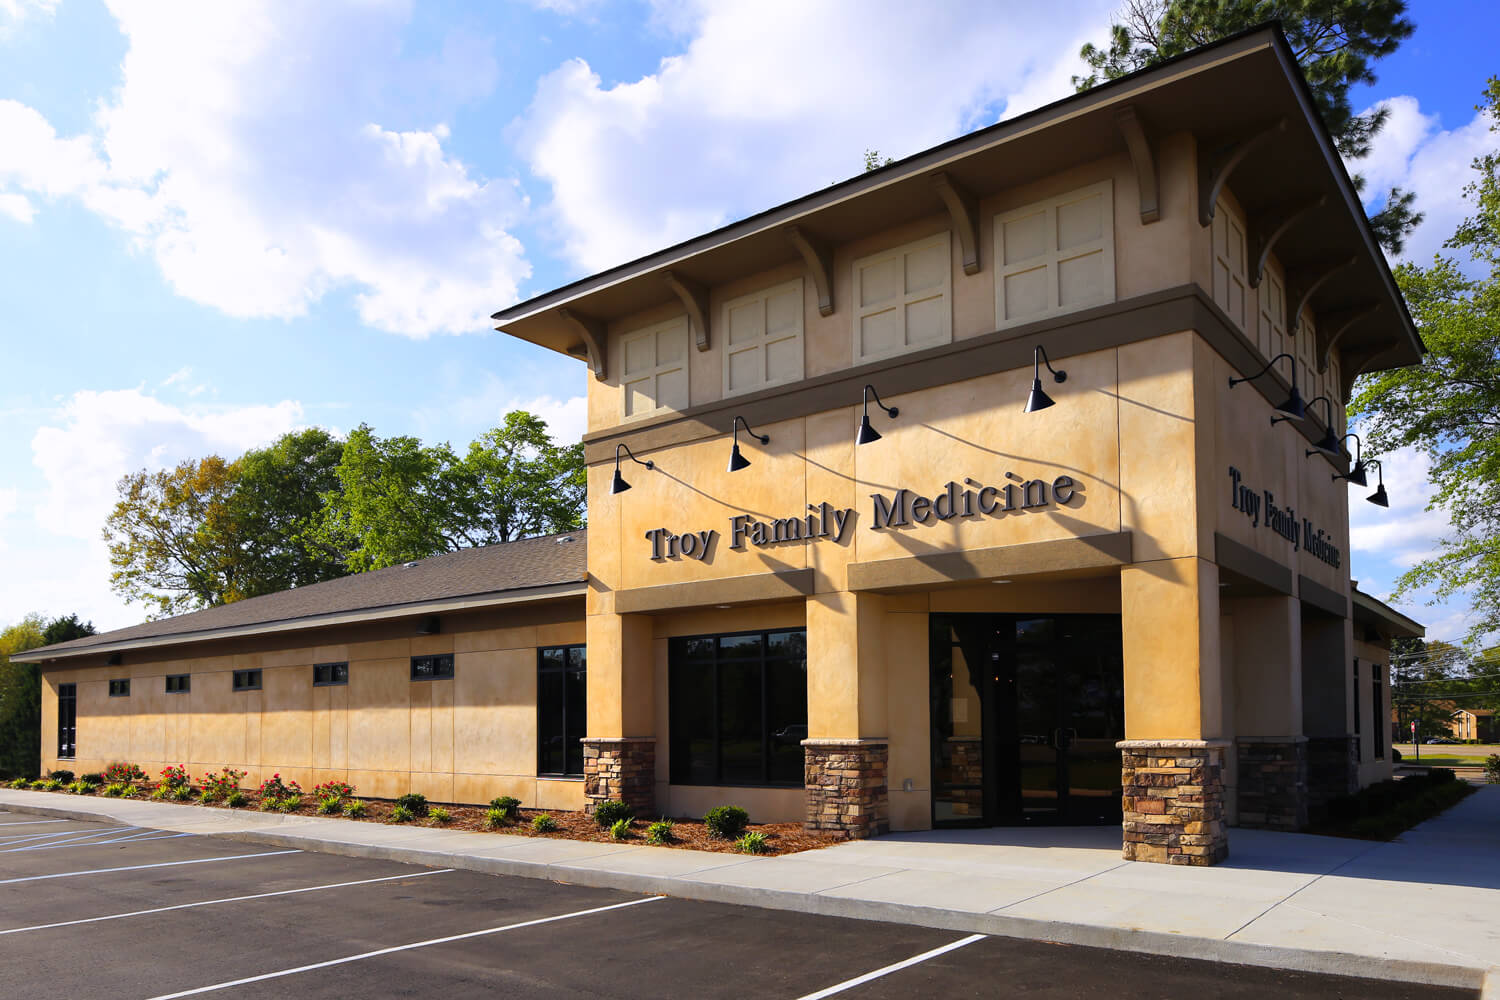 Troy Family Medicine Front Perspective - Designed by Foshee Architecture